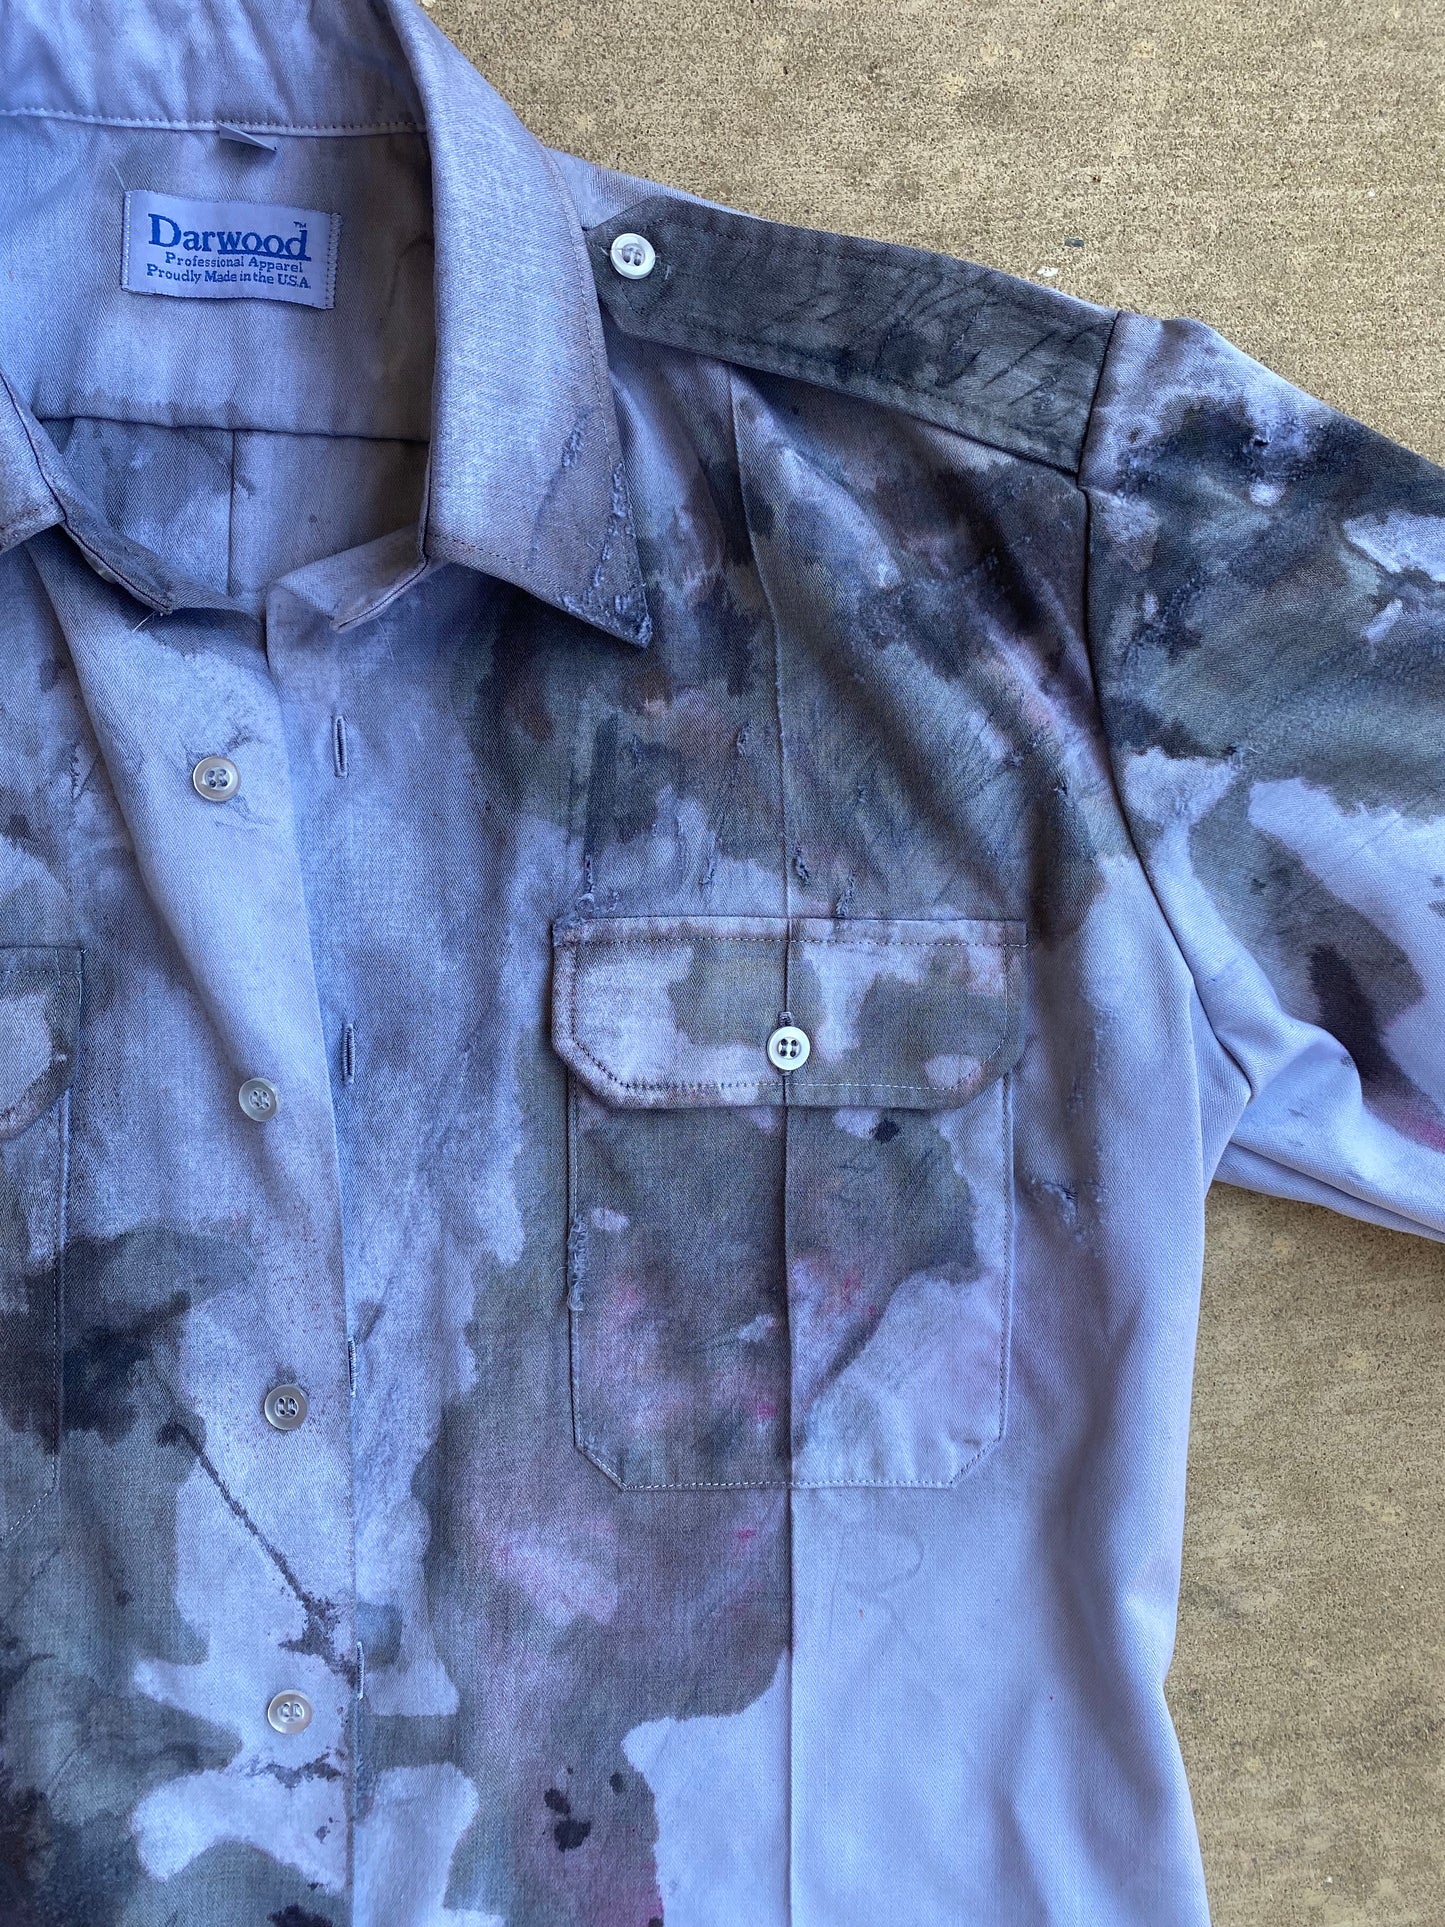 BAWR Wetlands Guard Collared Shirt - Brimm Archive Wardrobe Research